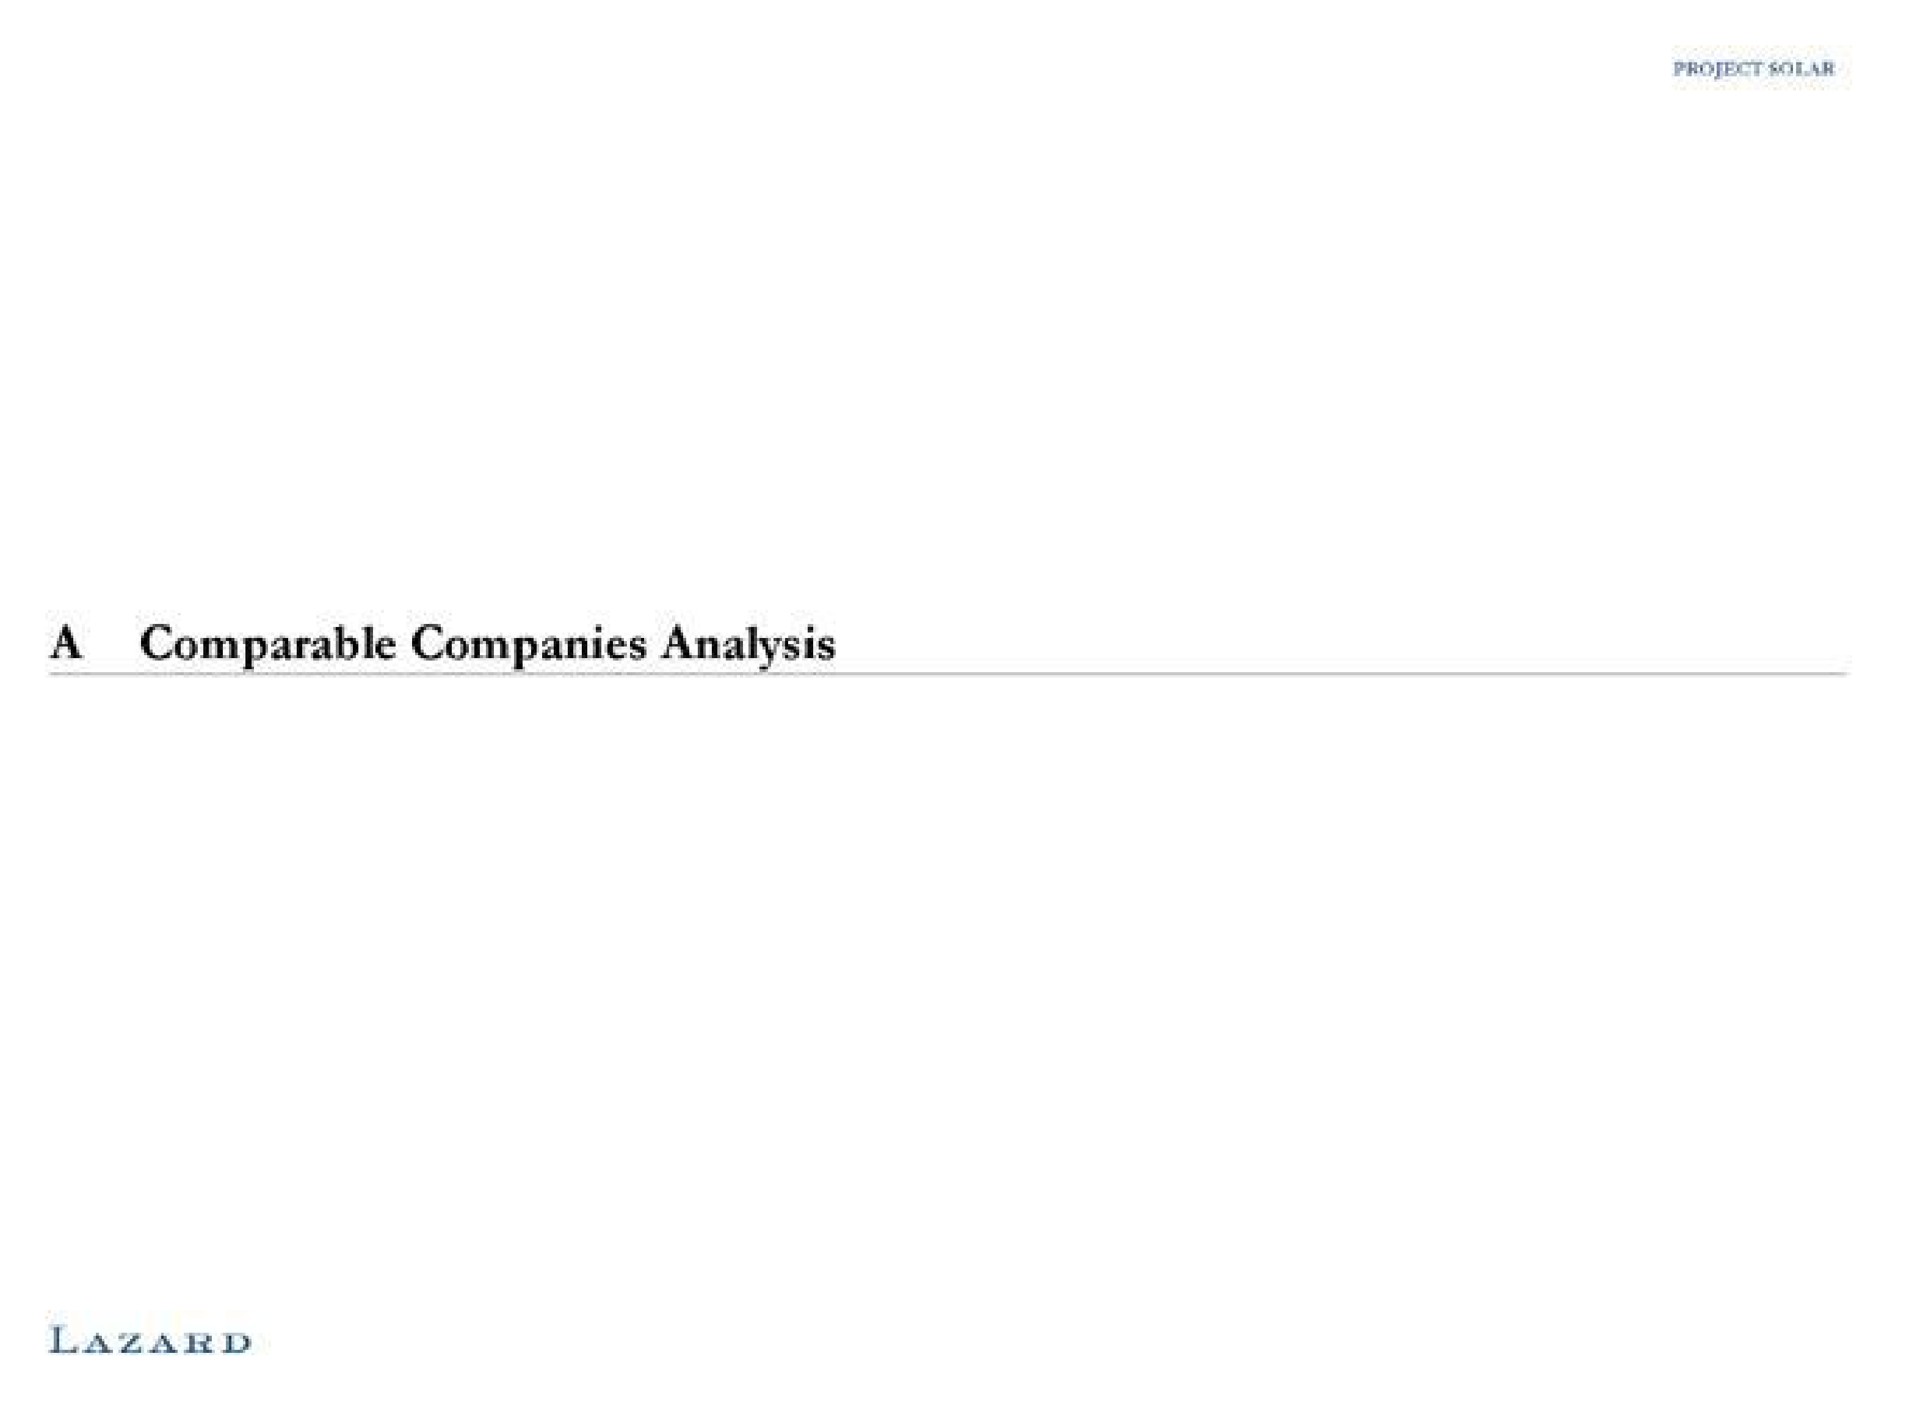 a comparable companies analysis | Lazard